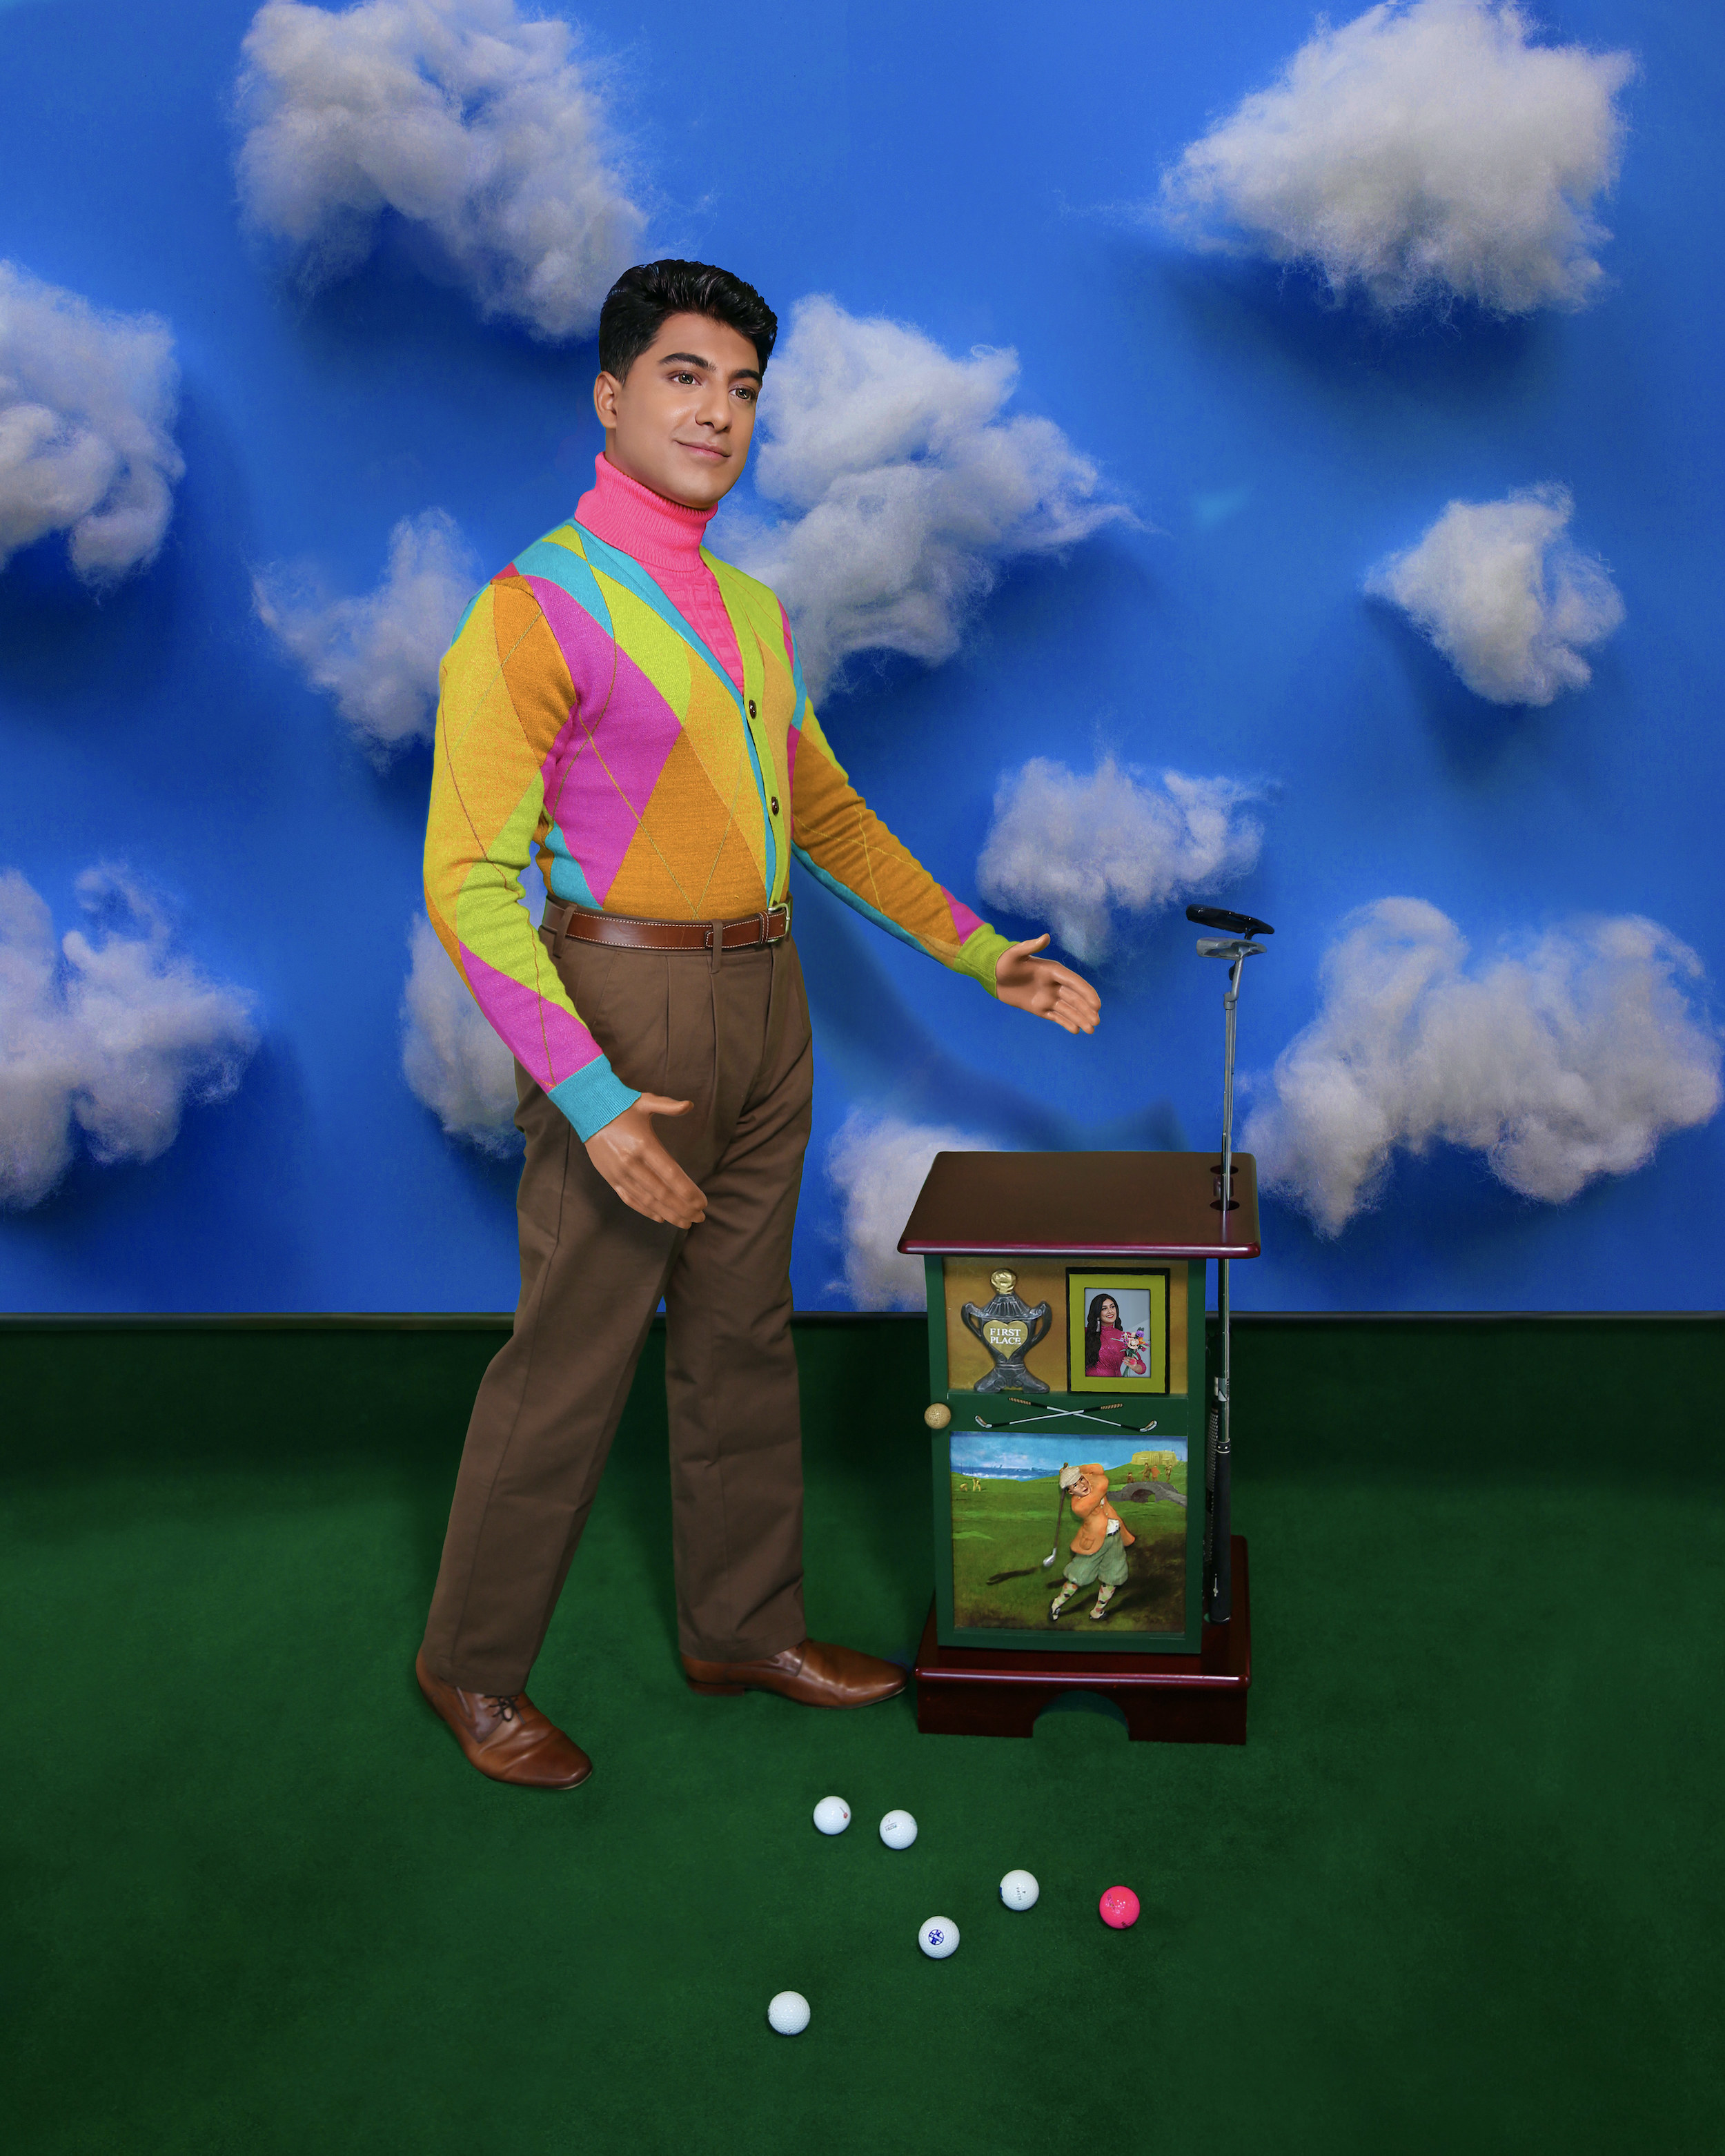 Ritesh art outside with clouds and green for golfing